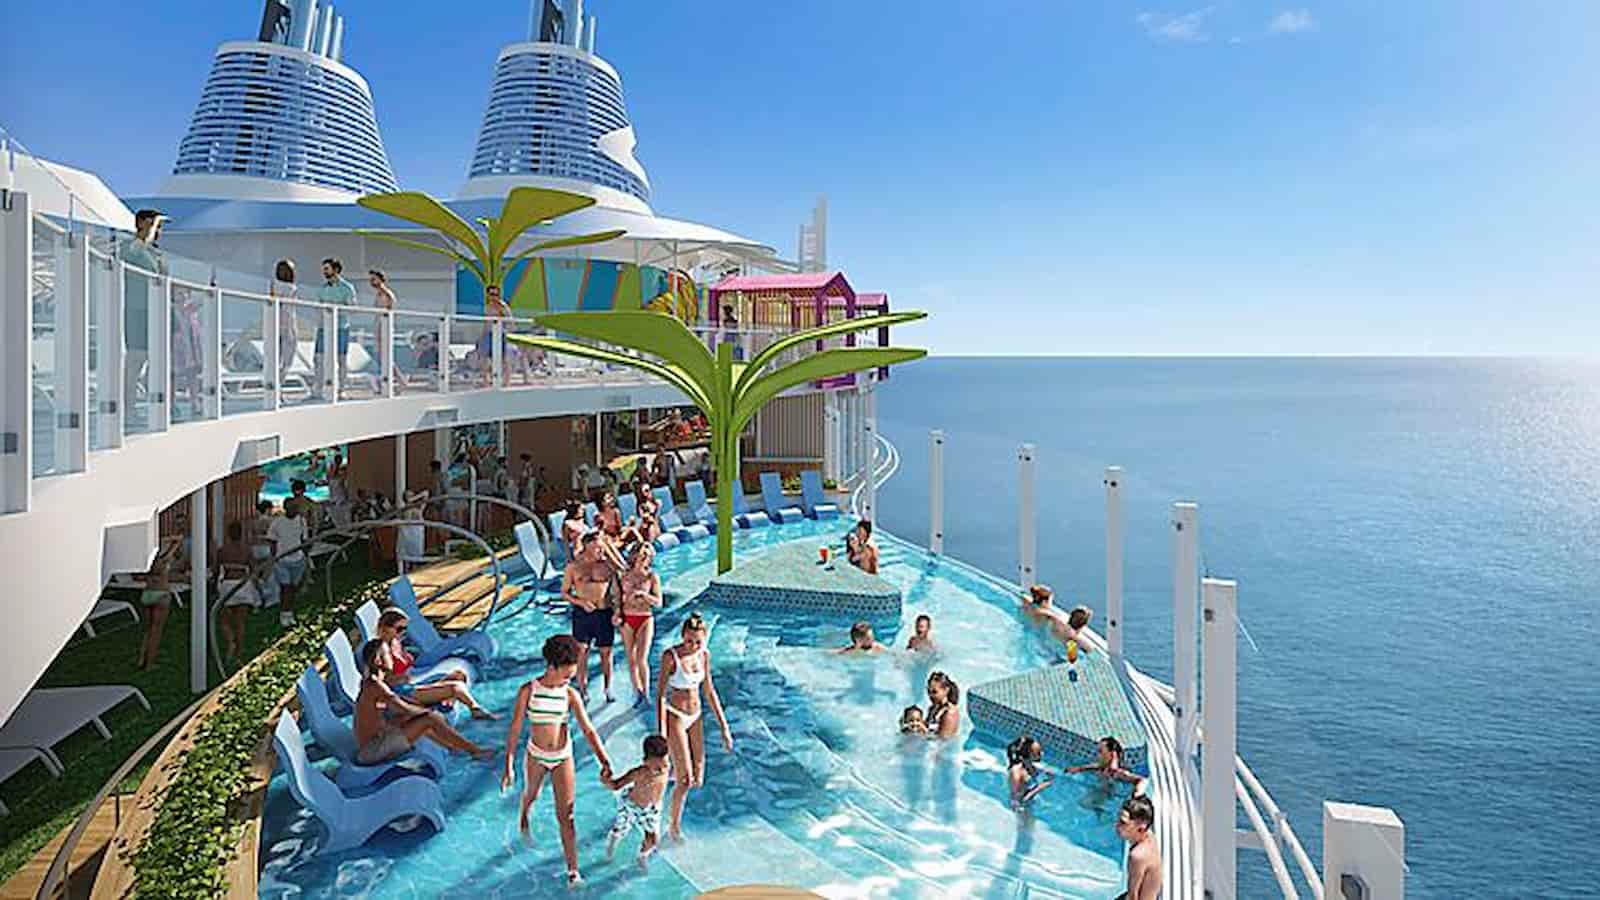 12 Things to Do on a Cruise Sea Day, Cruise Sea Day, Things to Do on a Cruise Sea Day